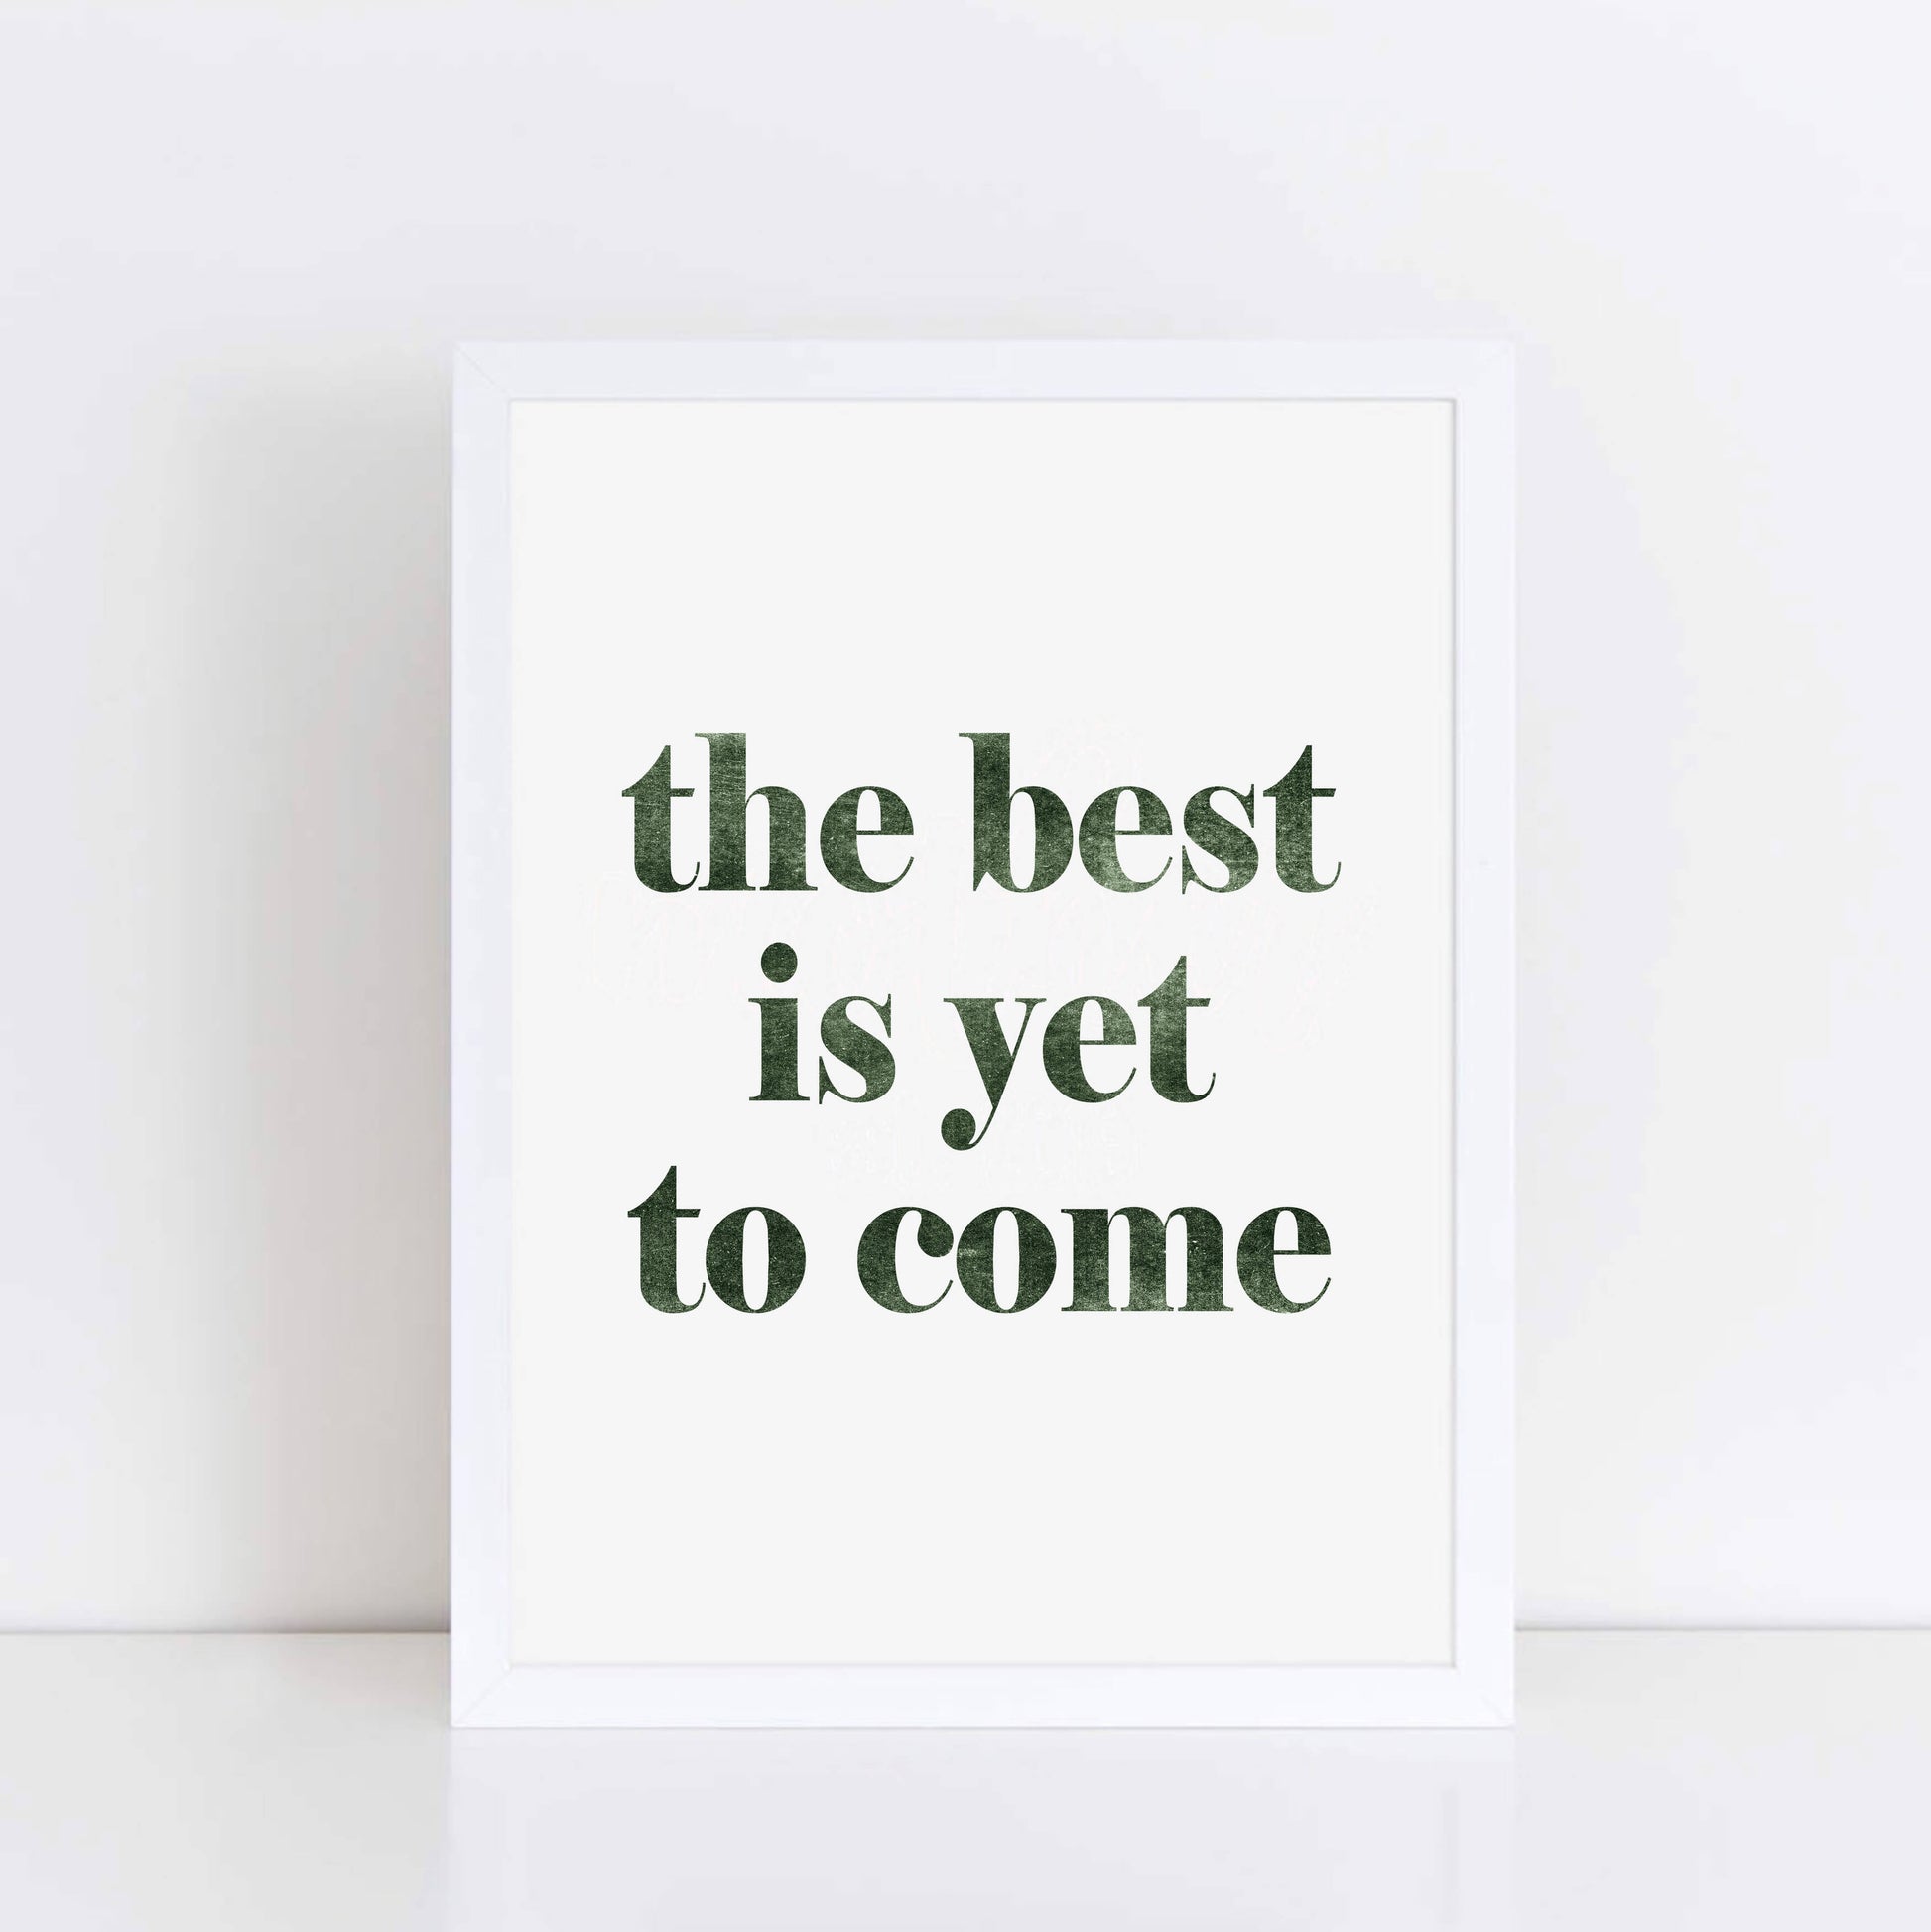 The Best Is Yet To Come Wallprint by SixElevenCreations. Product Code SEP0705